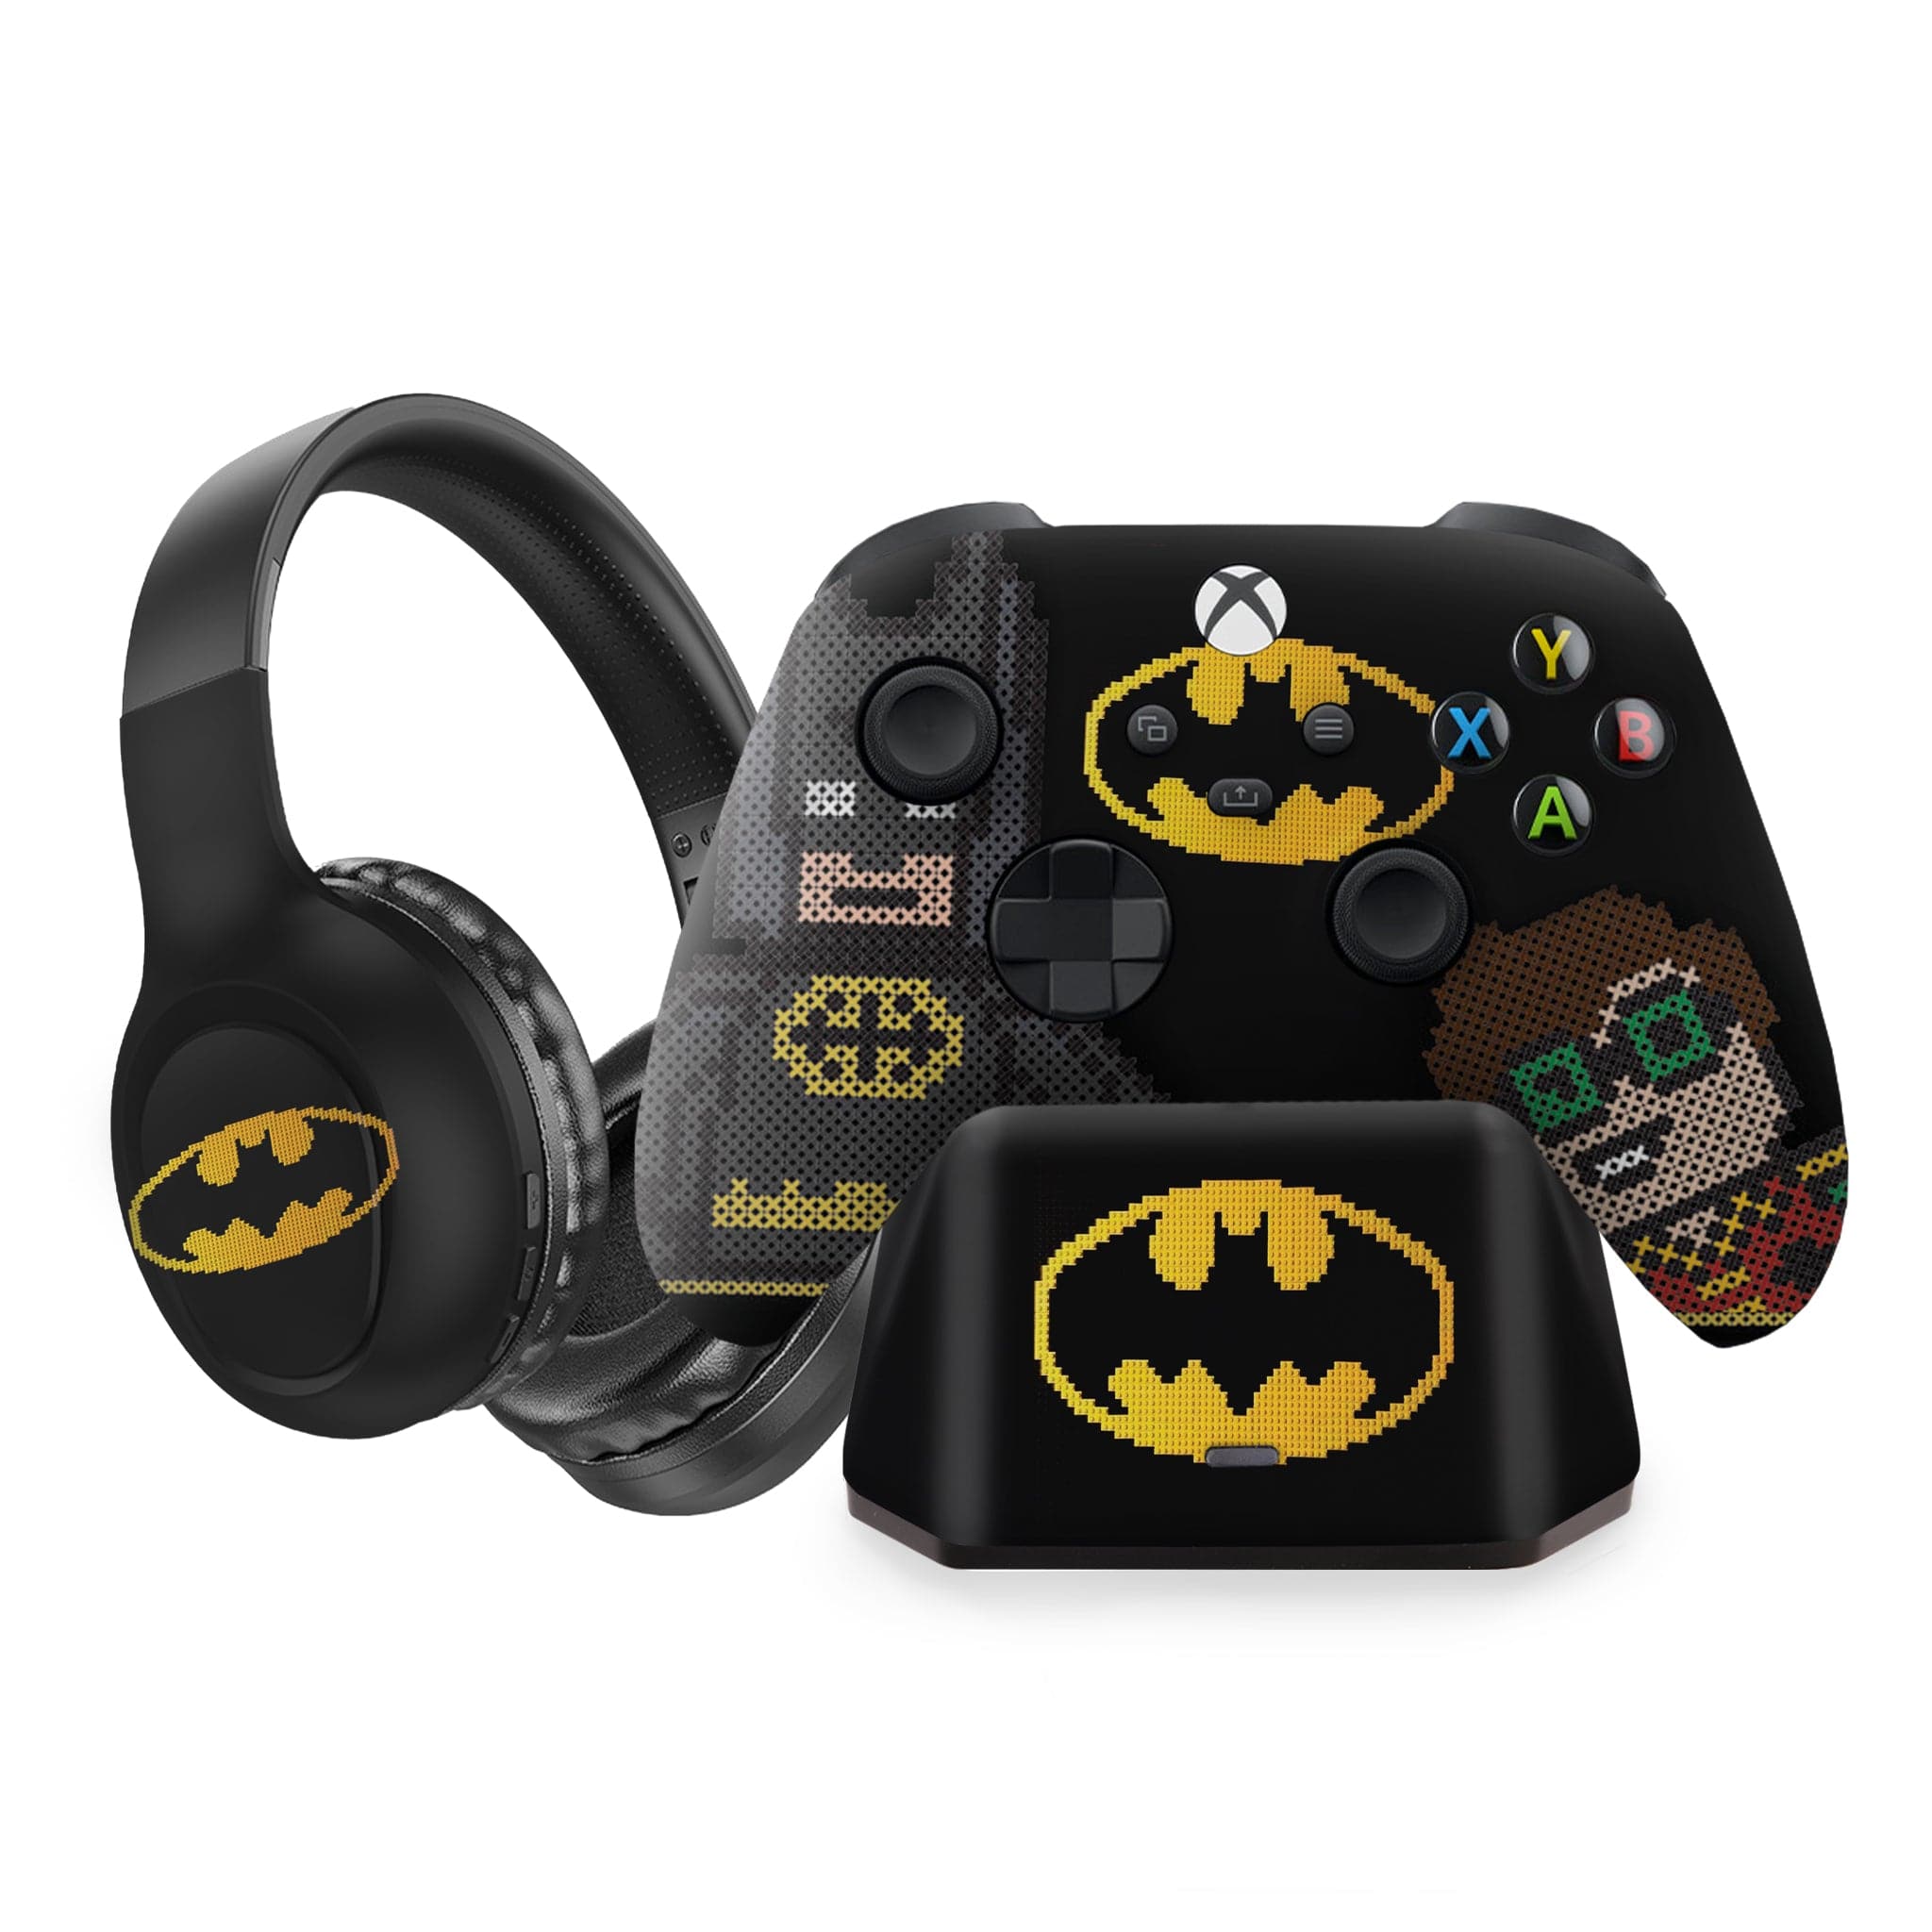 Lego Batman inspired Xbox Series X Modded Controller with Charging Station & Headphone